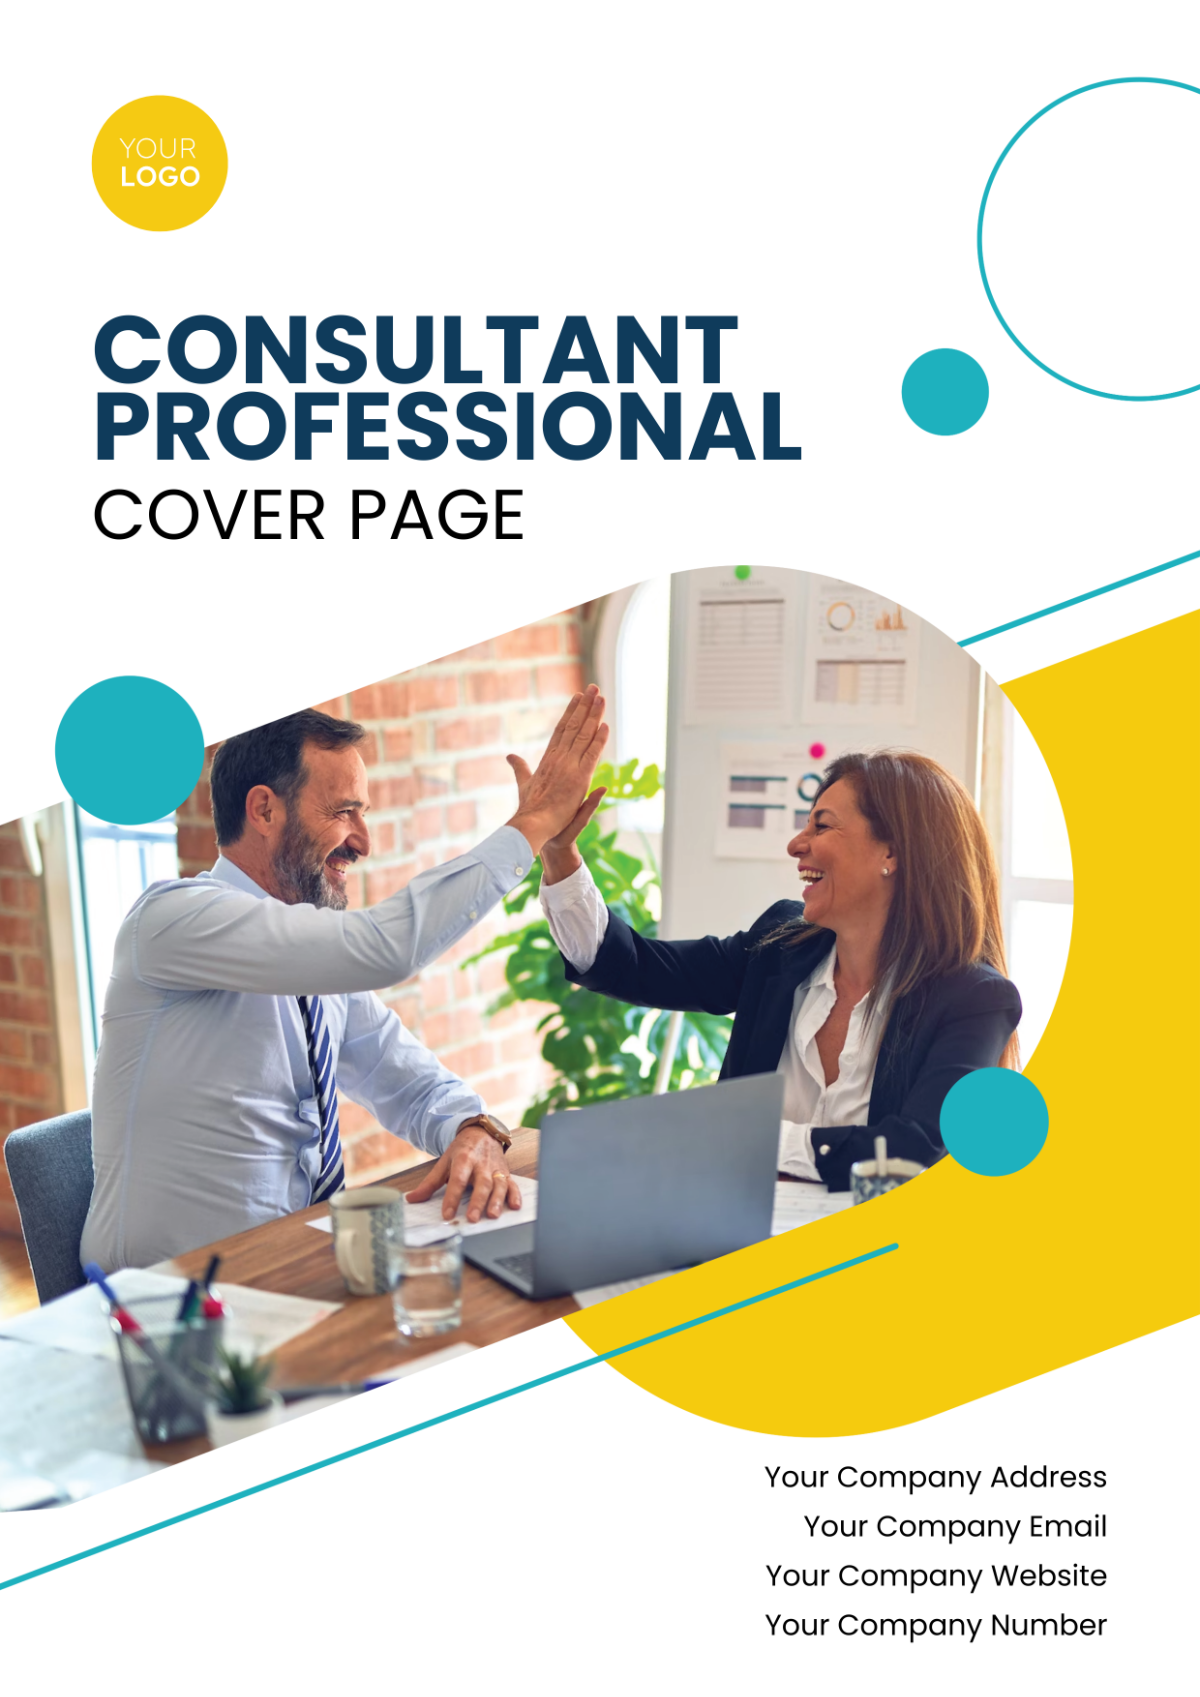 Consultant Professional Cover Page